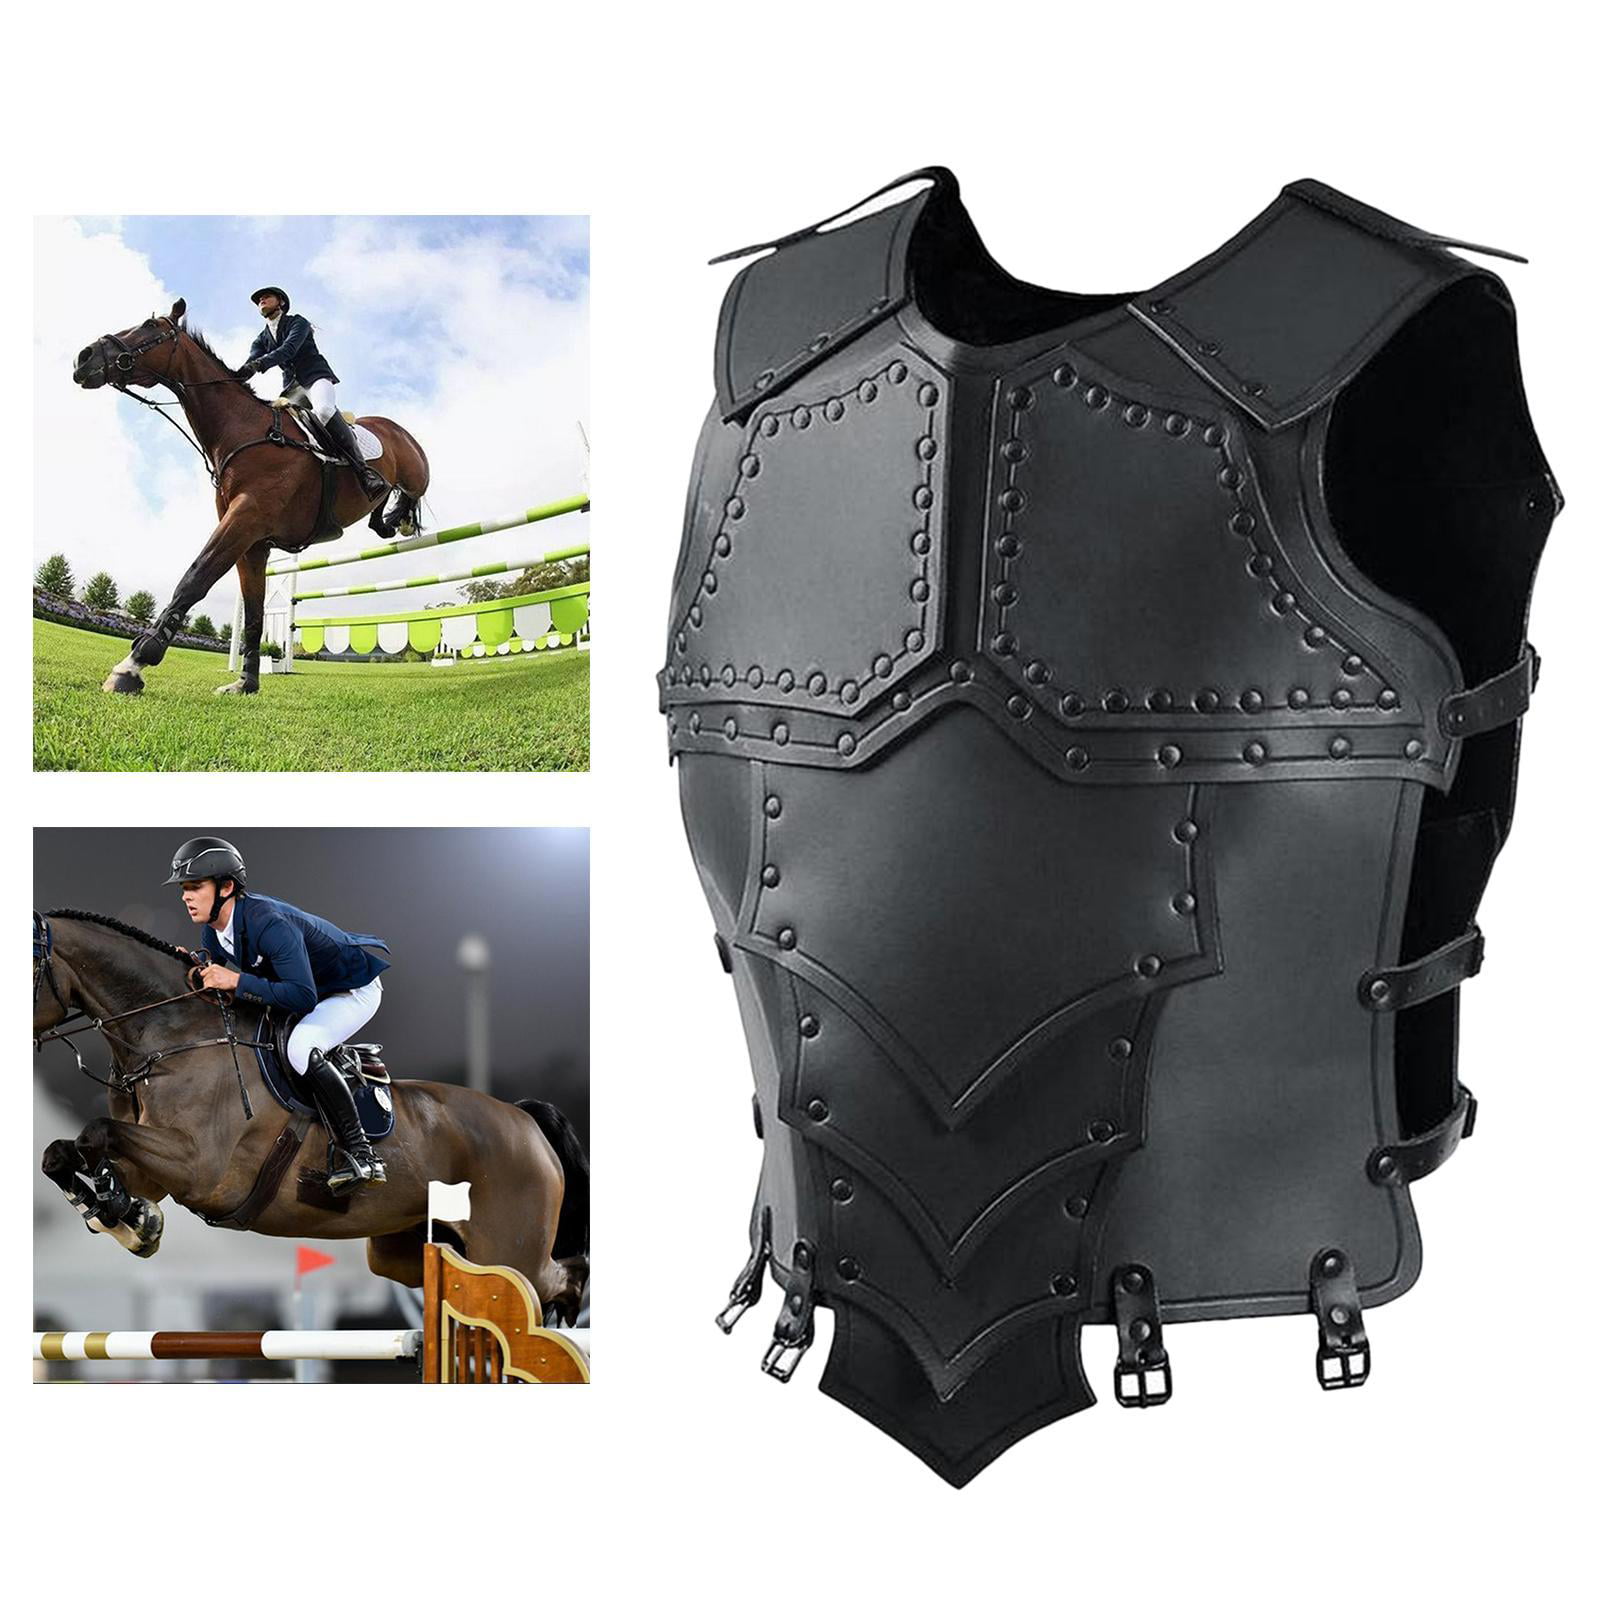 Equestrian Safety Horse Riding Vest Body Protector Waistcoat Unisex Black 